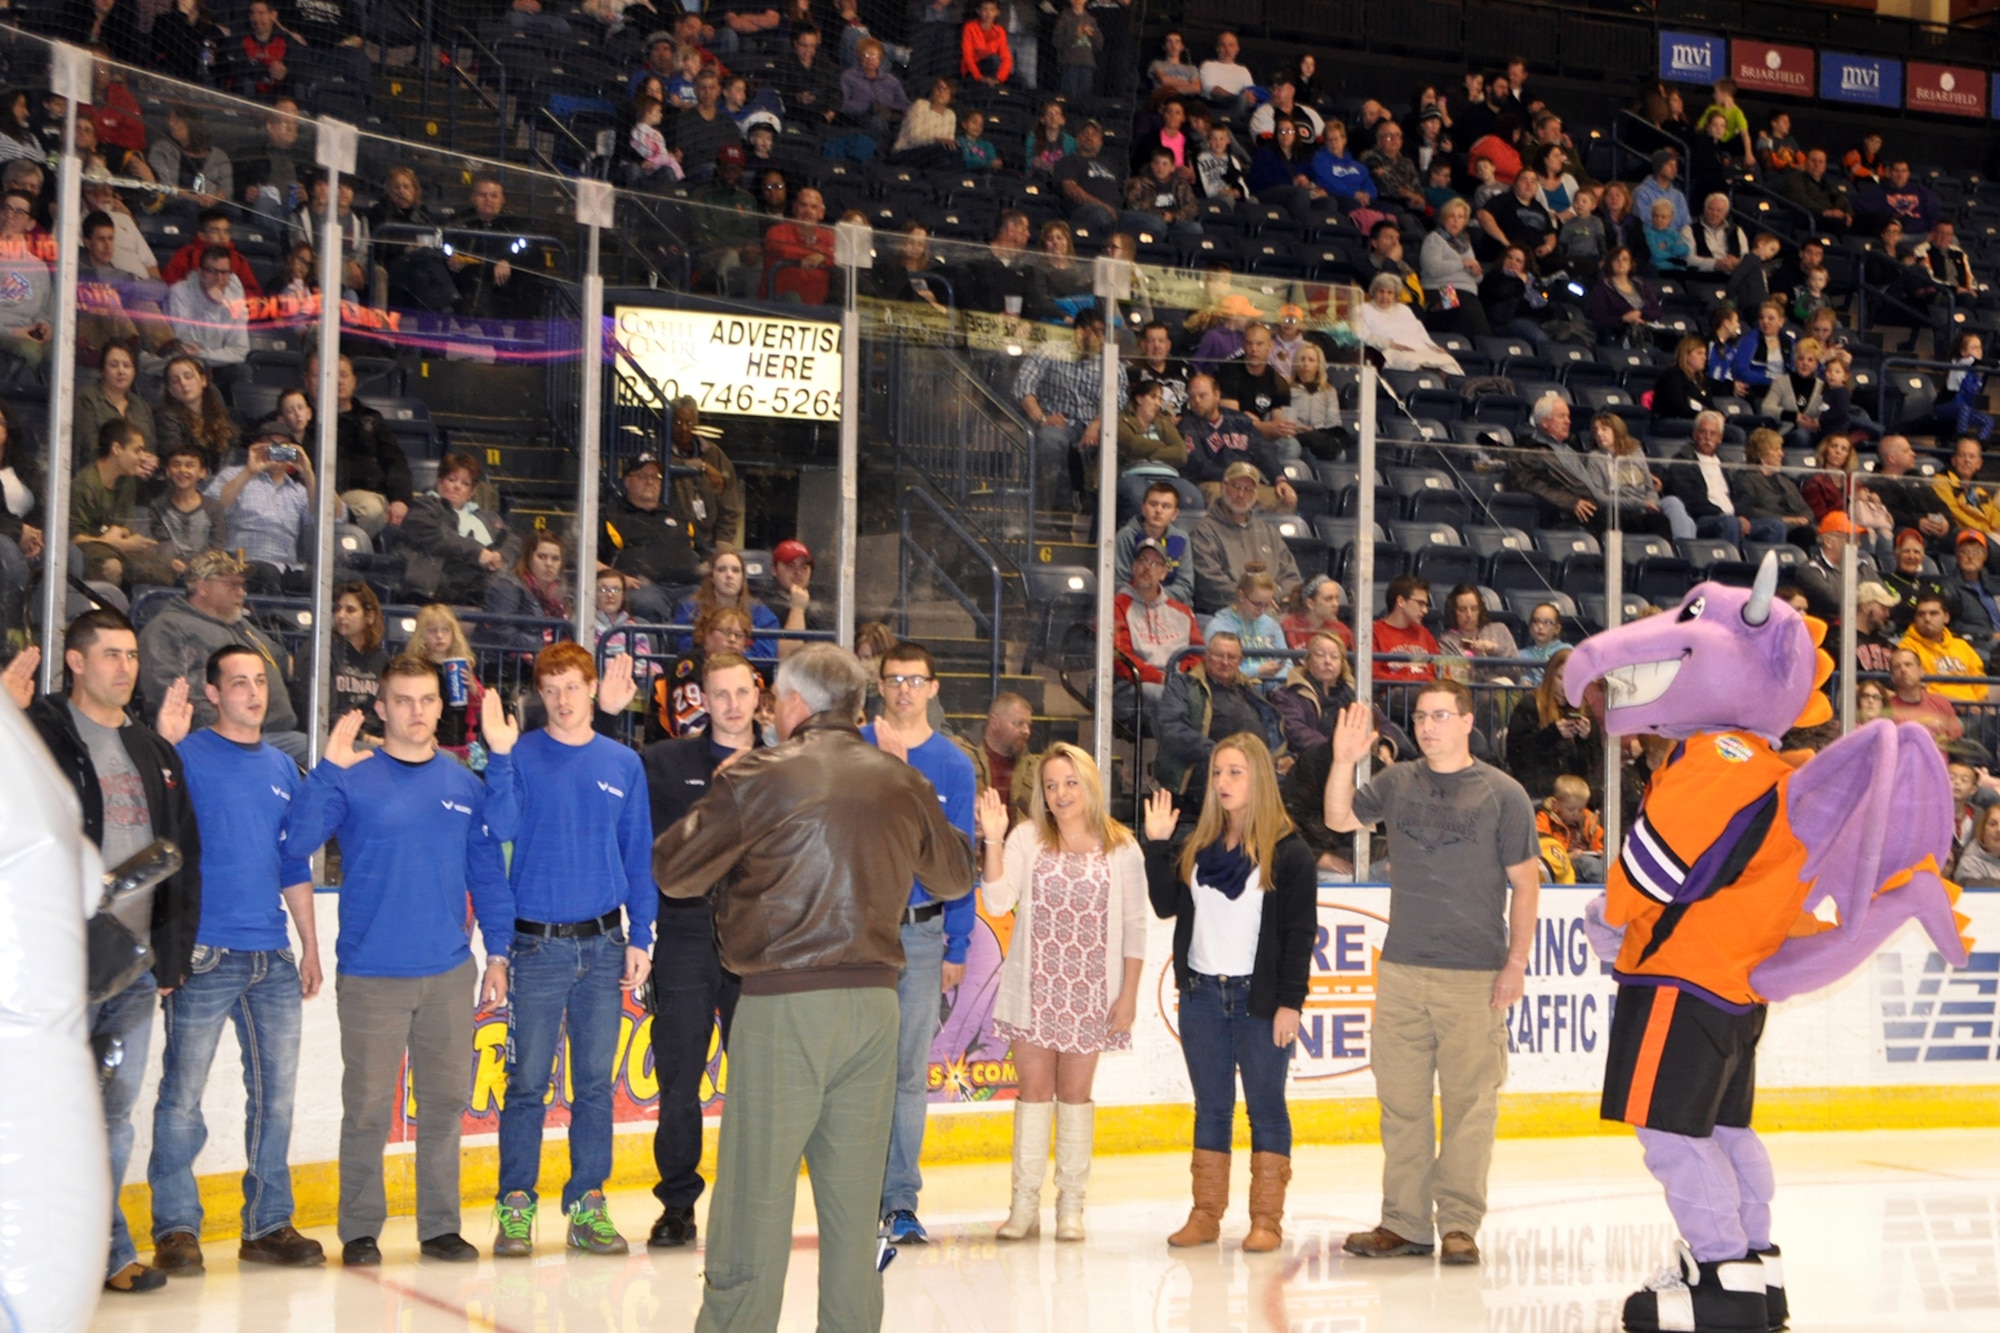 Col. Bill Phillips, commander of the 910th Operations Group, gives the oath of enlistment to some of the 910th Airlift Wing's newest members during a Youngstown Phantoms hockey game at the Covelli Centre here, April 2, 2016, while hockey fans and Phantoms mascot, Sparky, look on. A group of Citizen Airmen, based at nearby Youngstown Air Reserve Station, Ohio, participated in YARS Night Out activities before and during the game. The Phantoms, a member of the United States Hockey League, defeated the Omaha Lancers 4-1 in front of a home ice crowd of more than 3000 fans. (Courtesy Photo/Deana Barko)